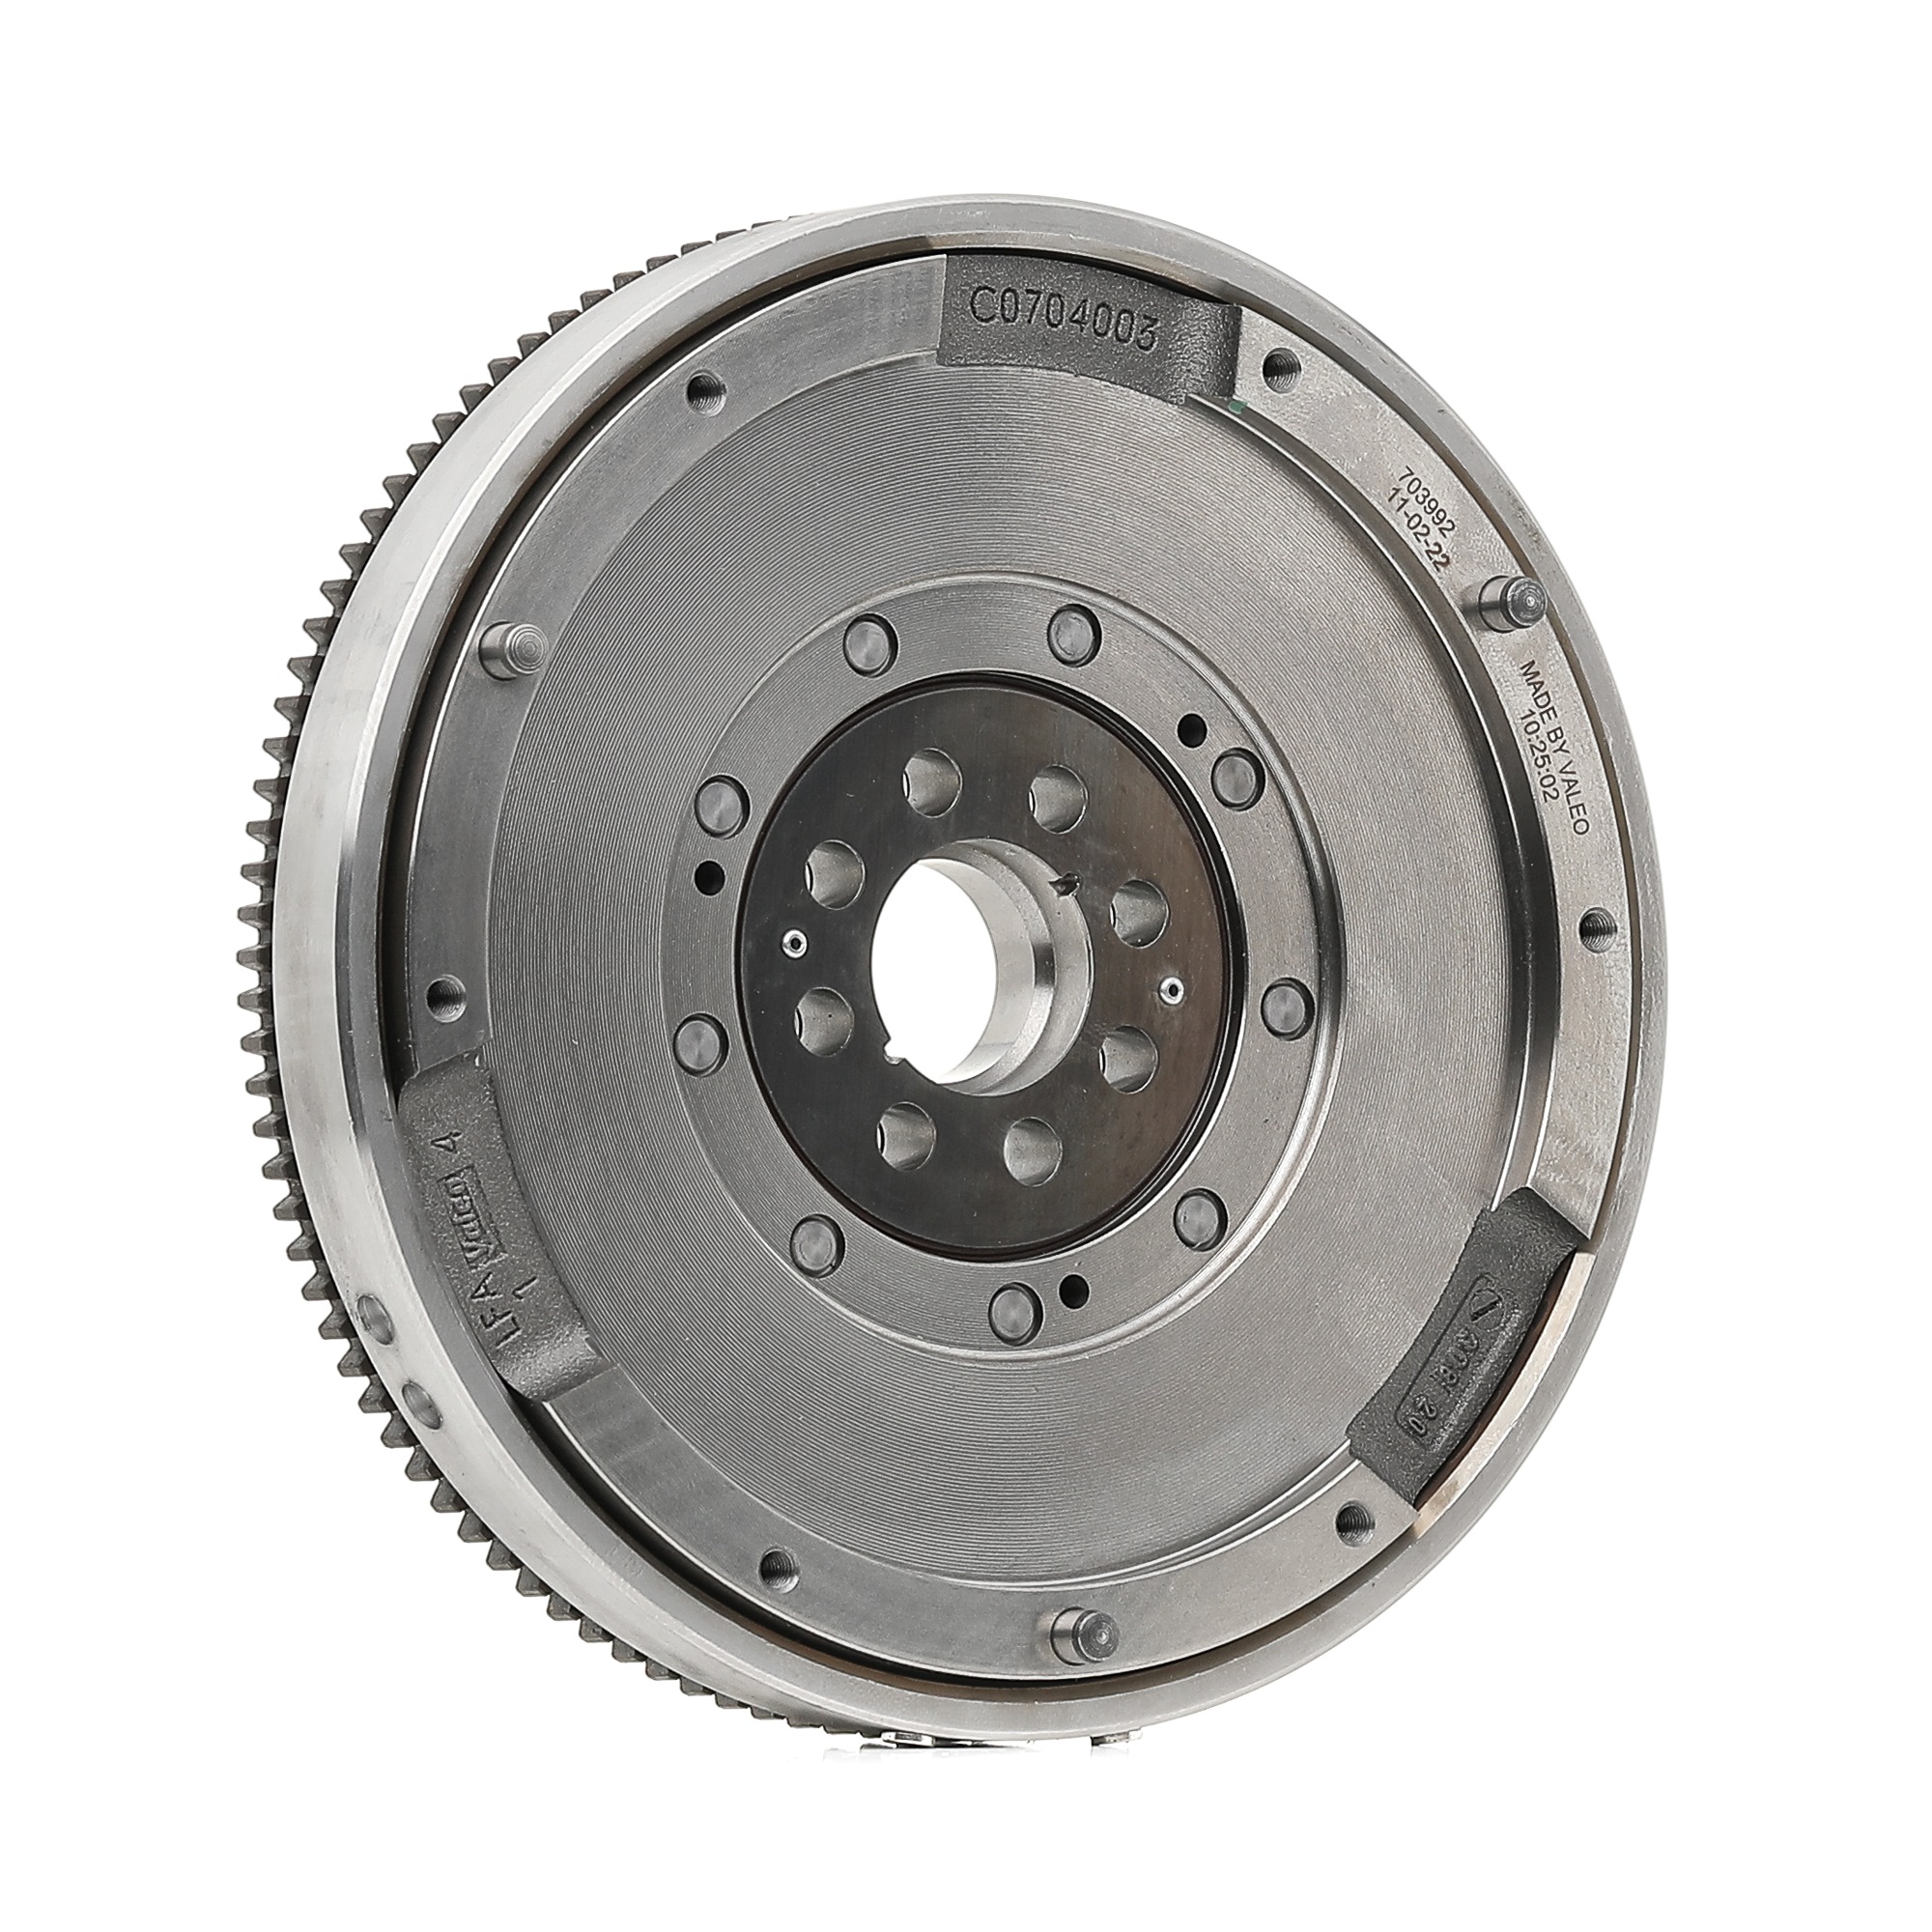 VALEO 836550 Dual mass flywheel LAND ROVER experience and price